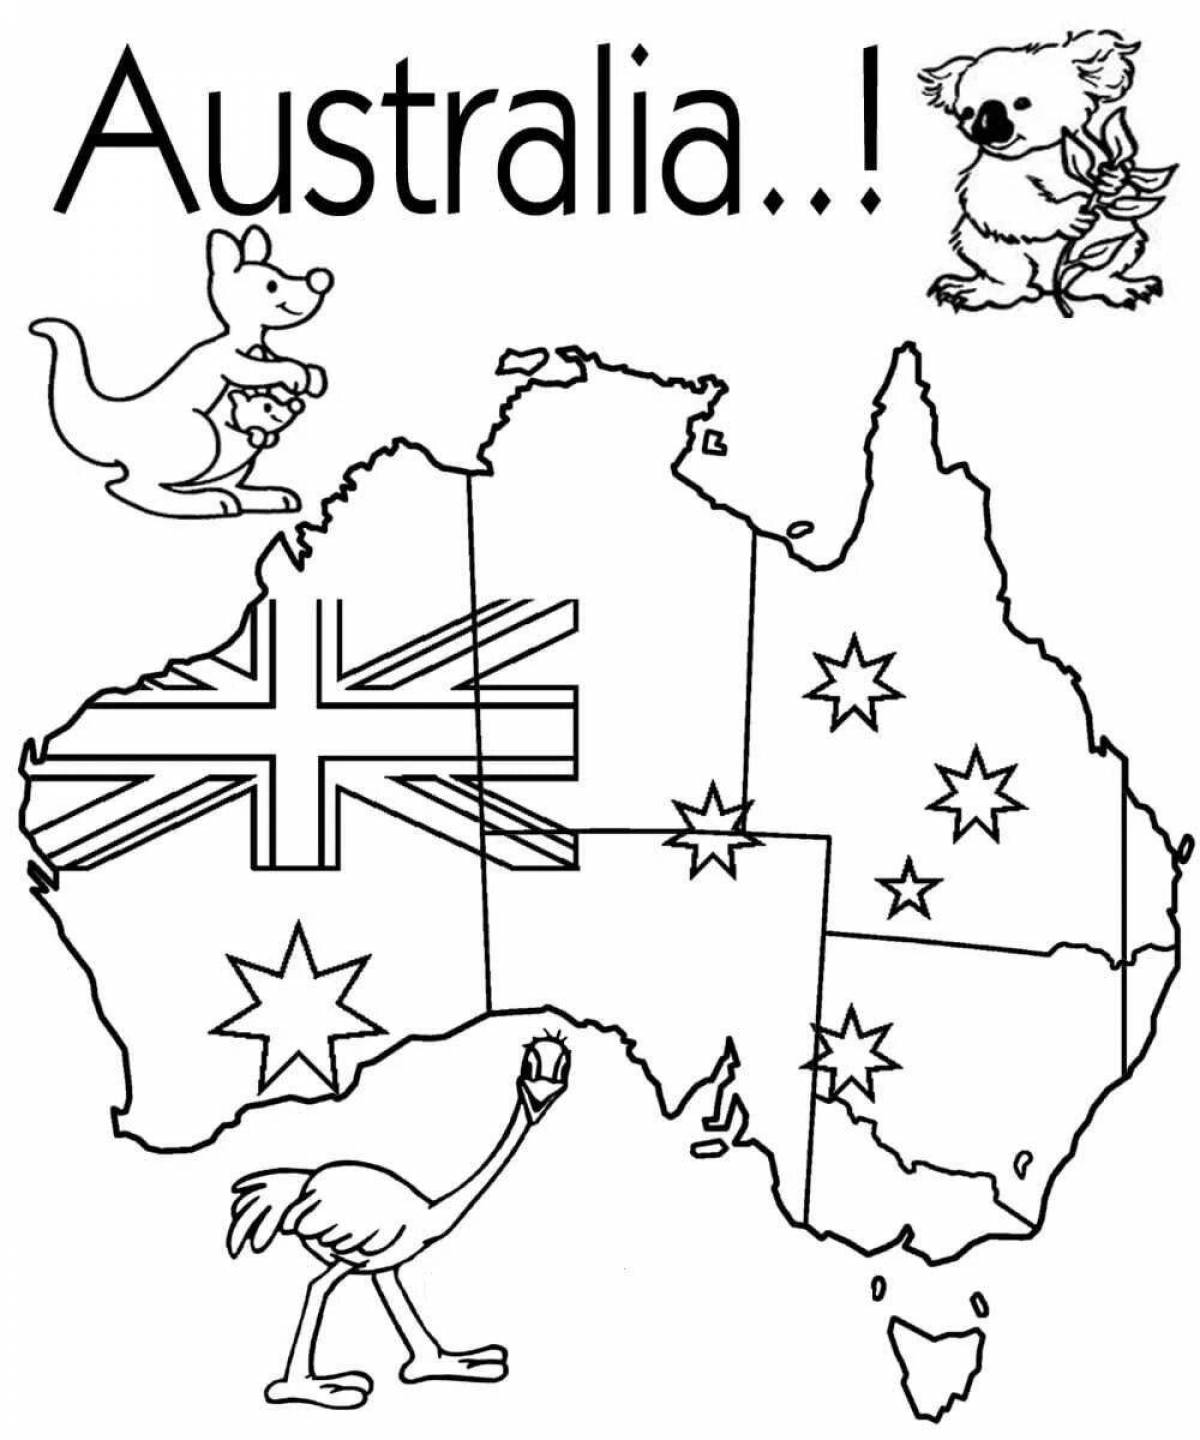 Australia coat of arms beautifully painted coloring page